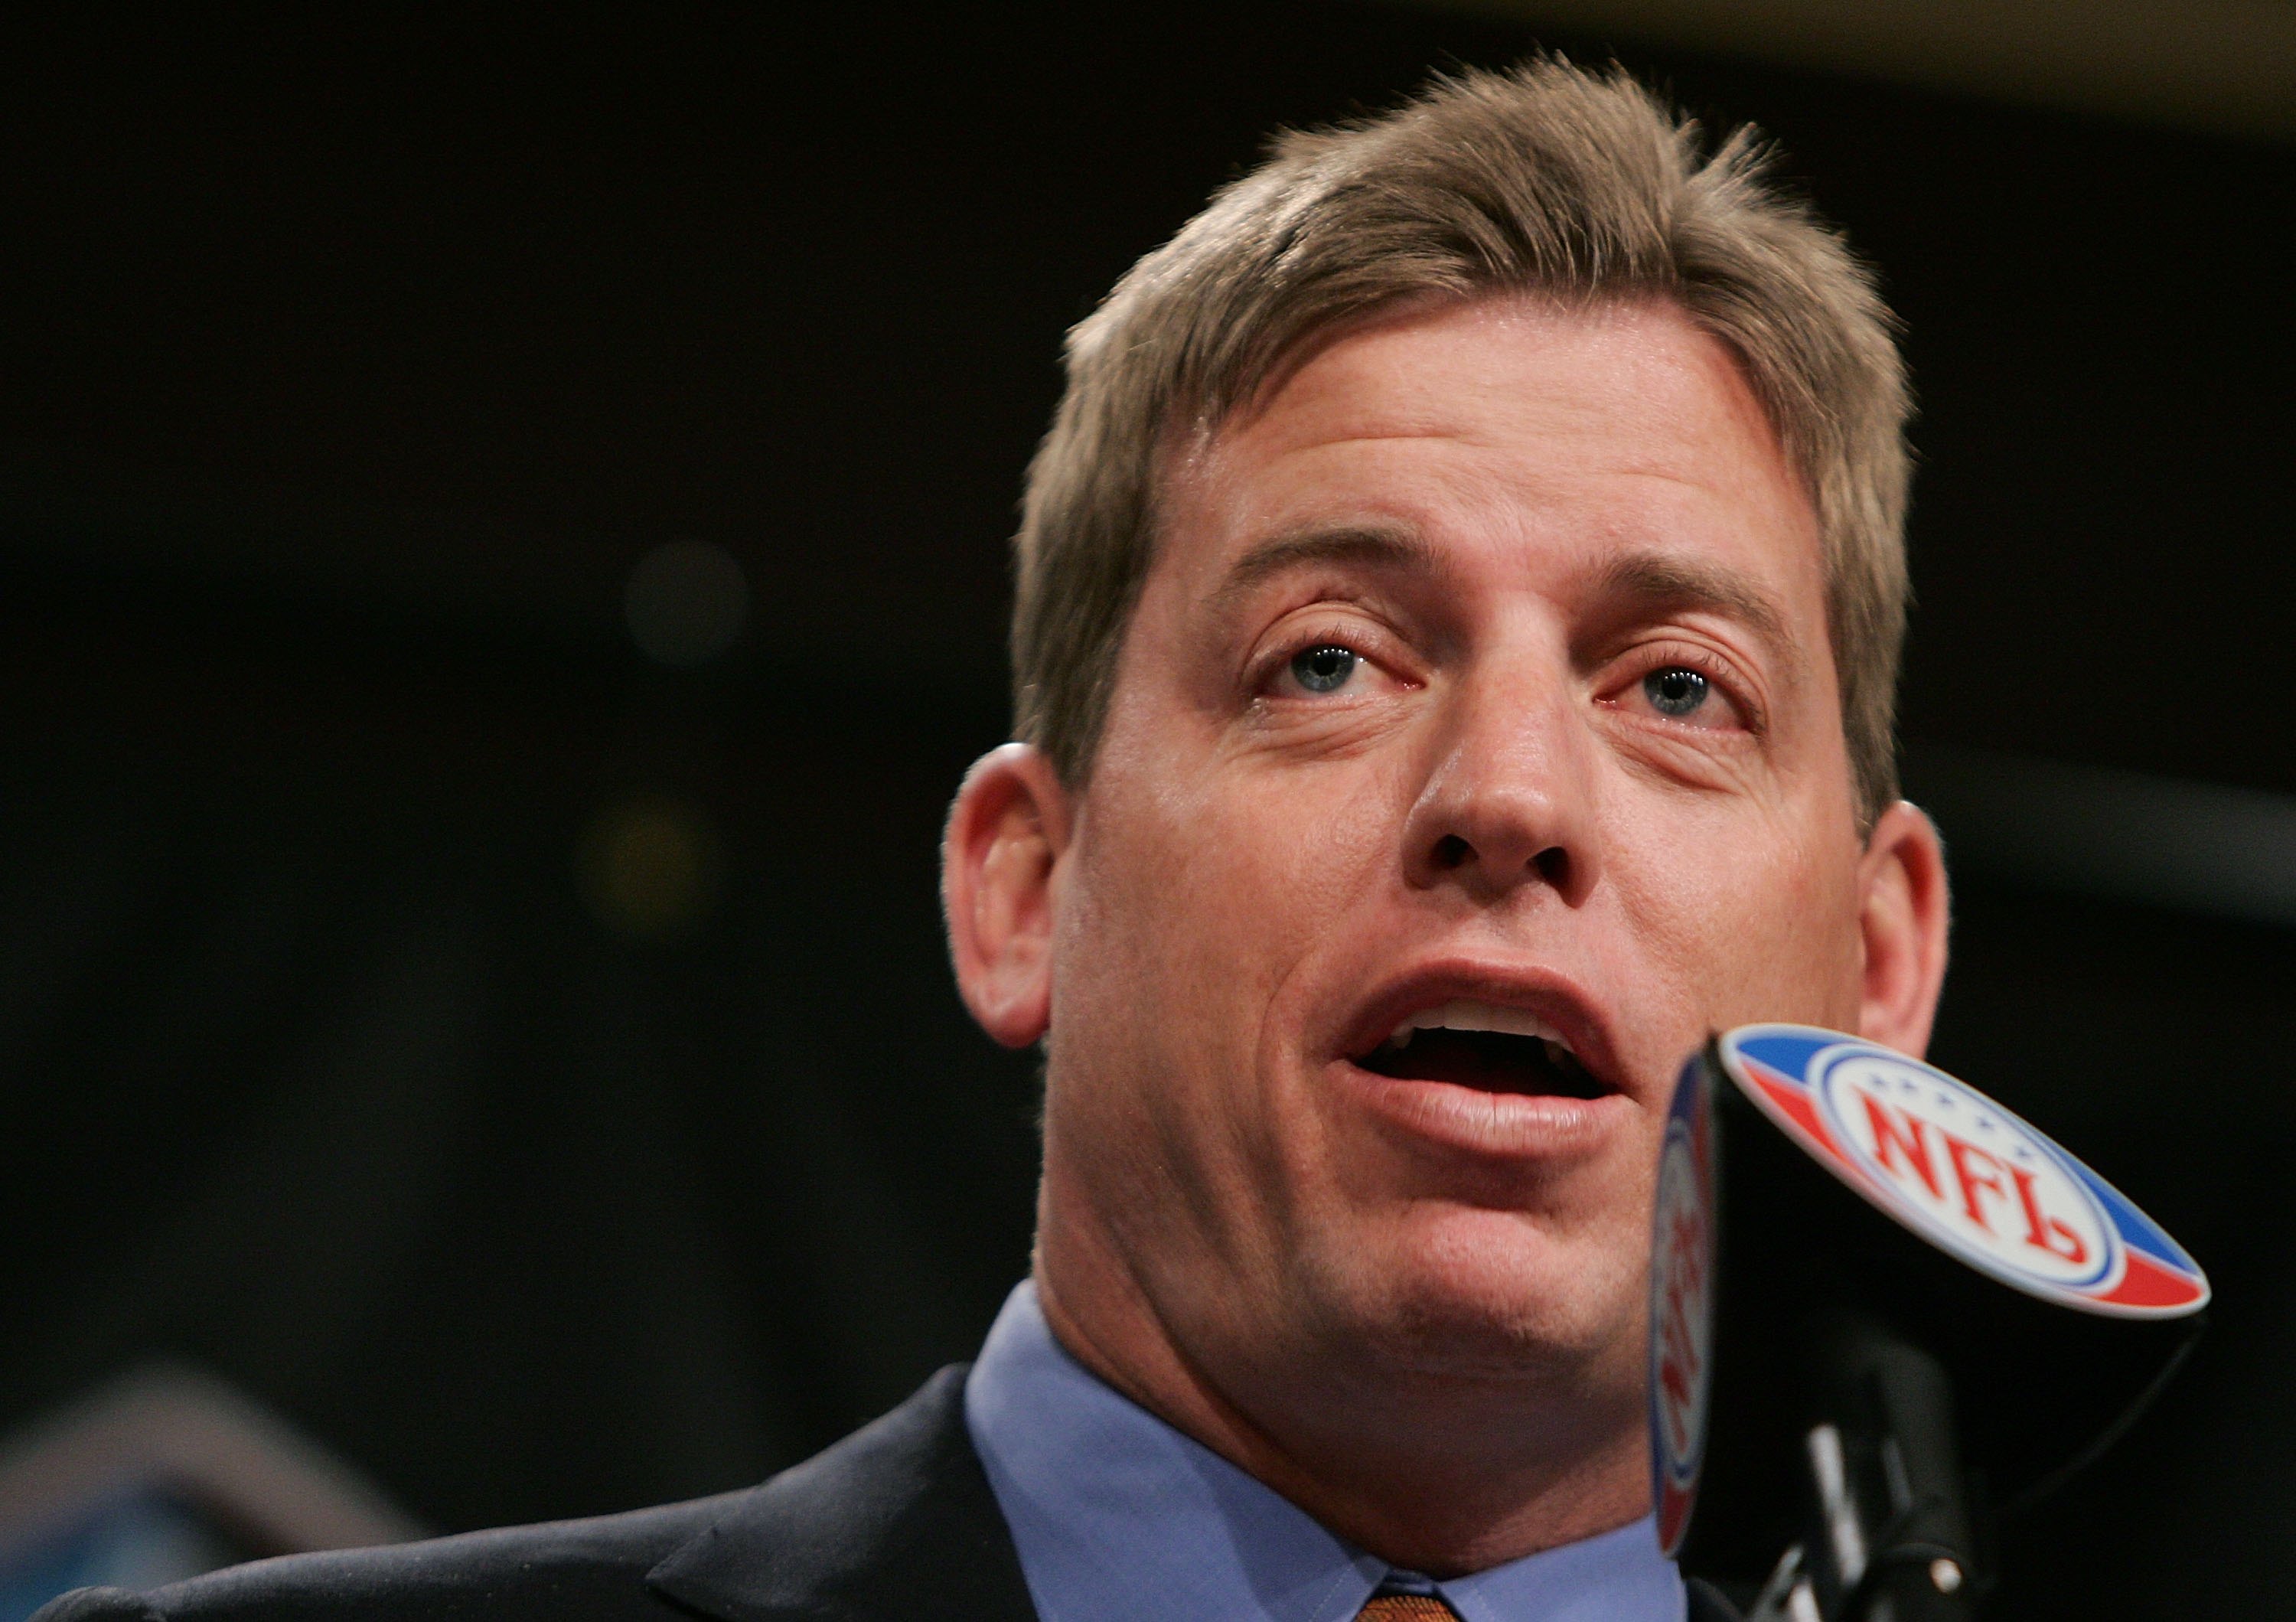 Troy Aikman fires back at Skip Bayless for questioning his sexuality.